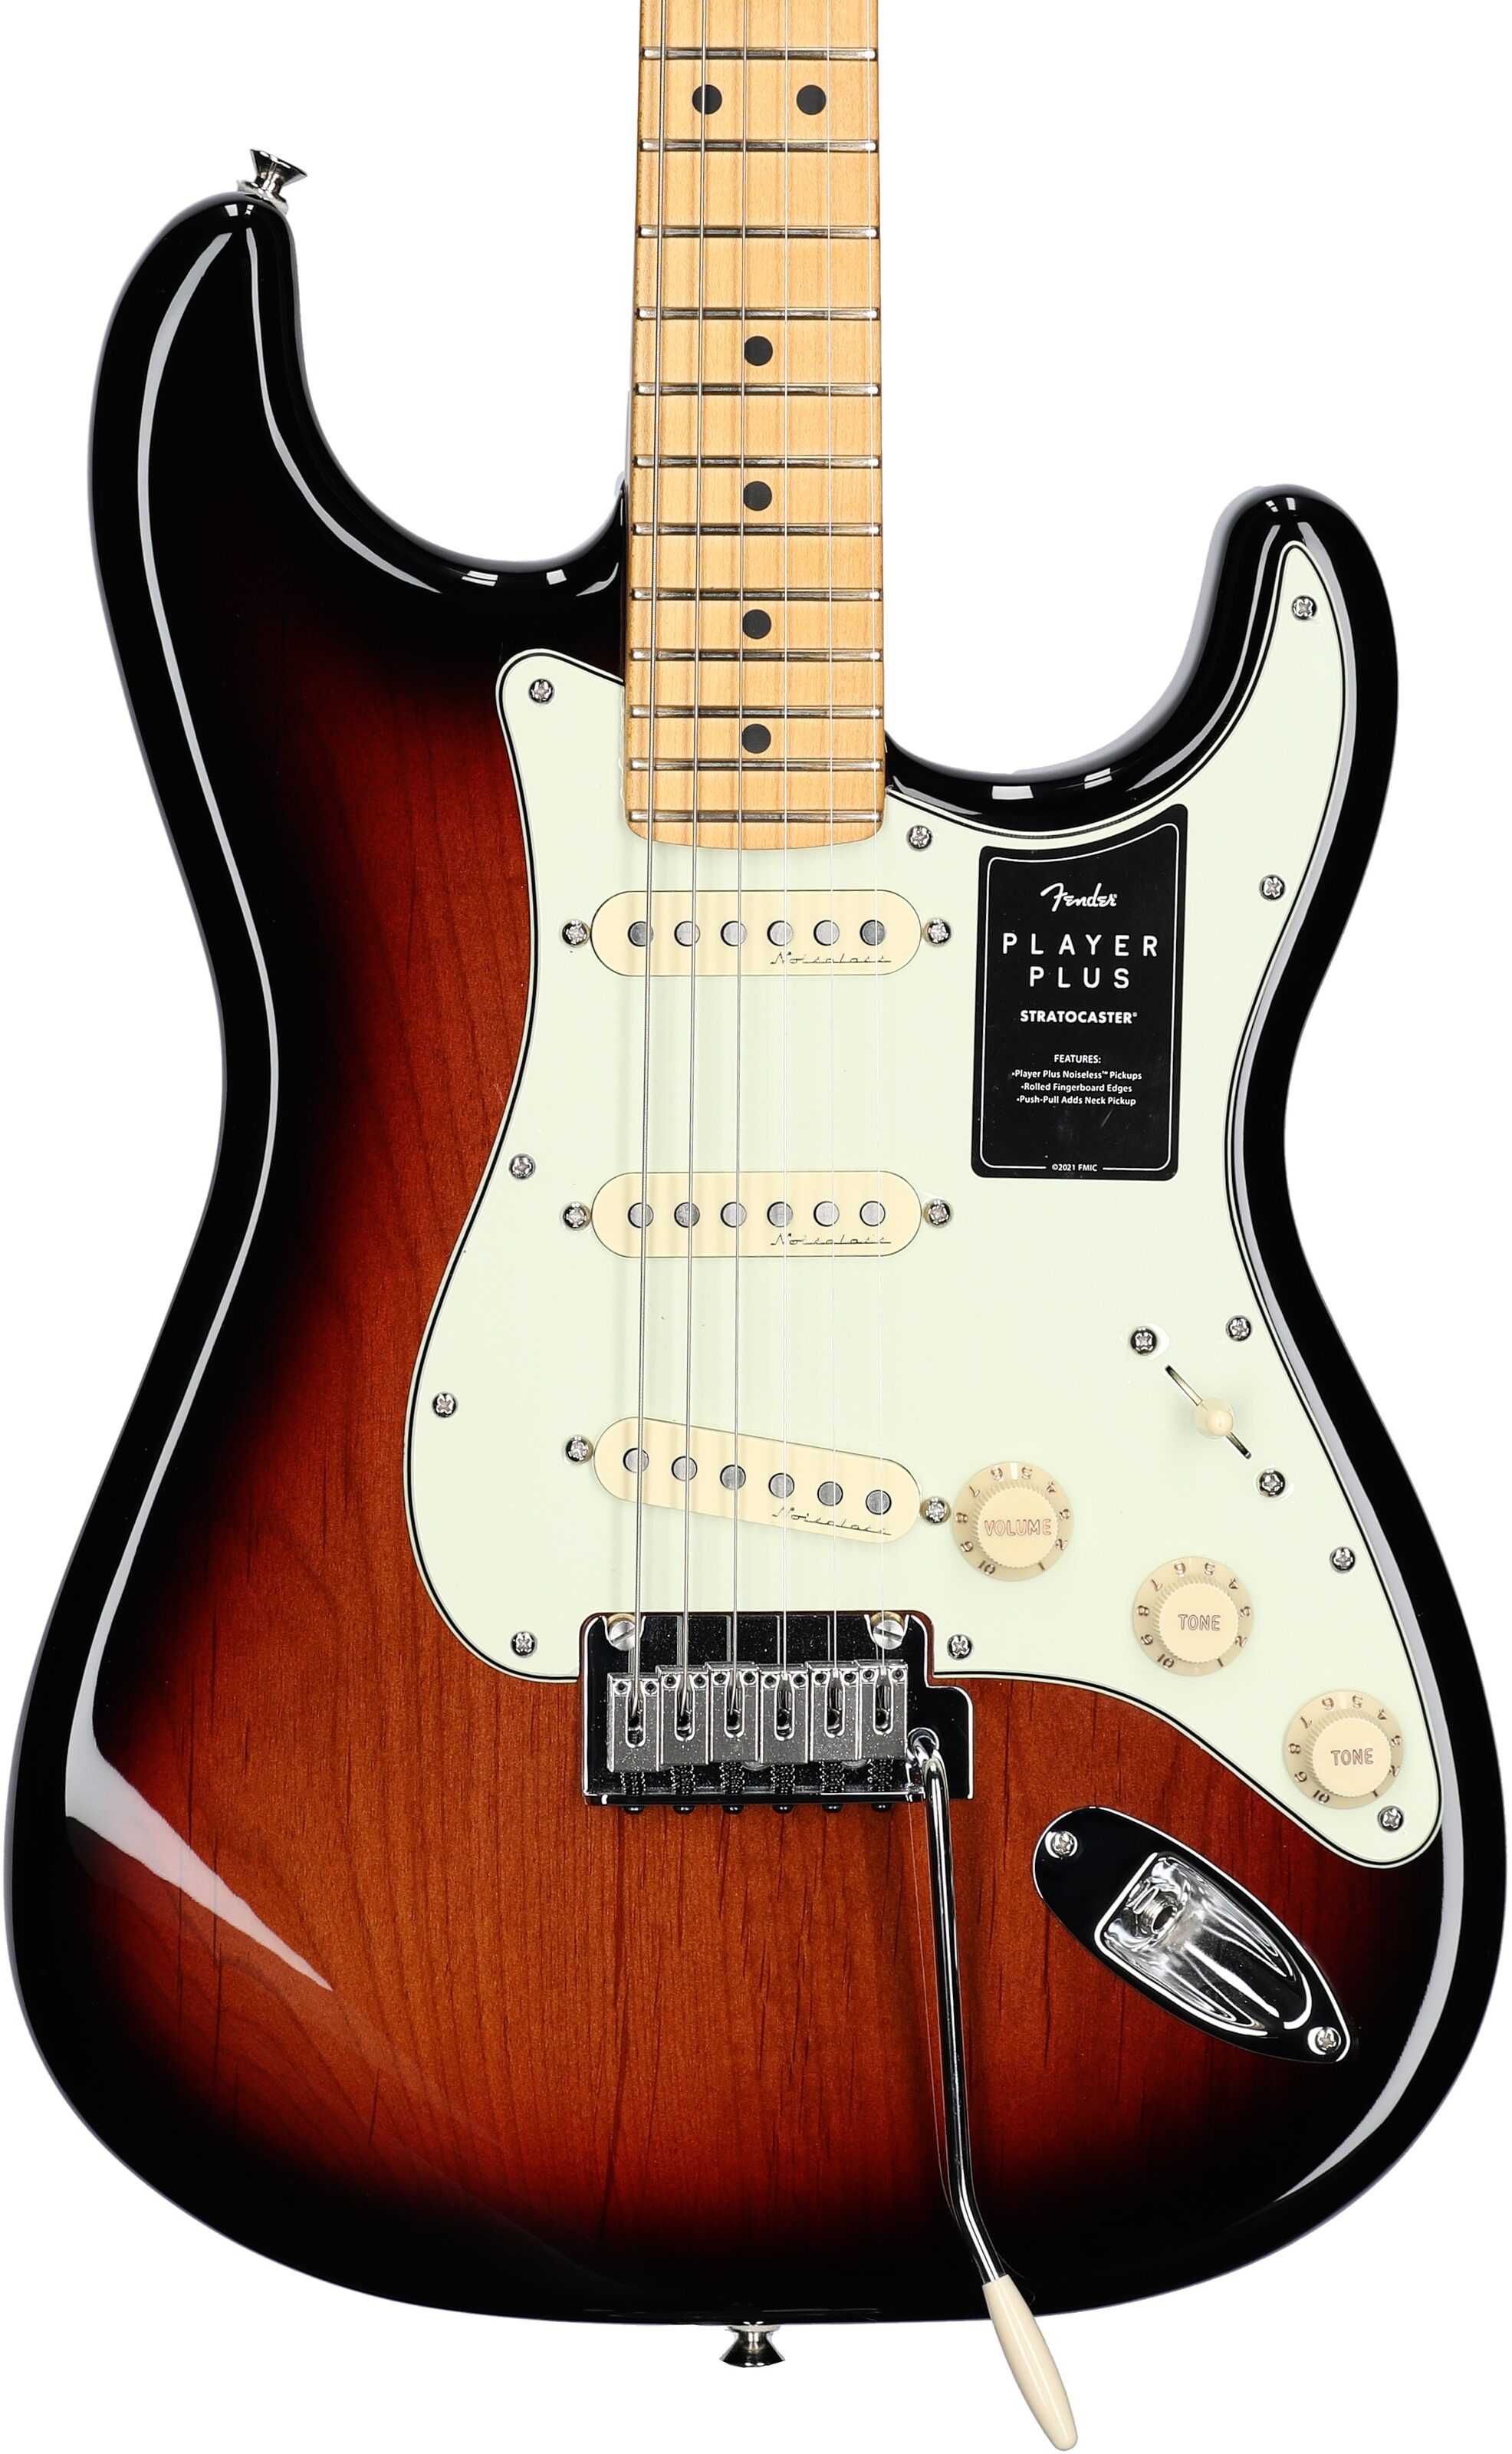 Maple　zZounds　Fender　Guitar,　Stratocaster　Player　Plus　Electric